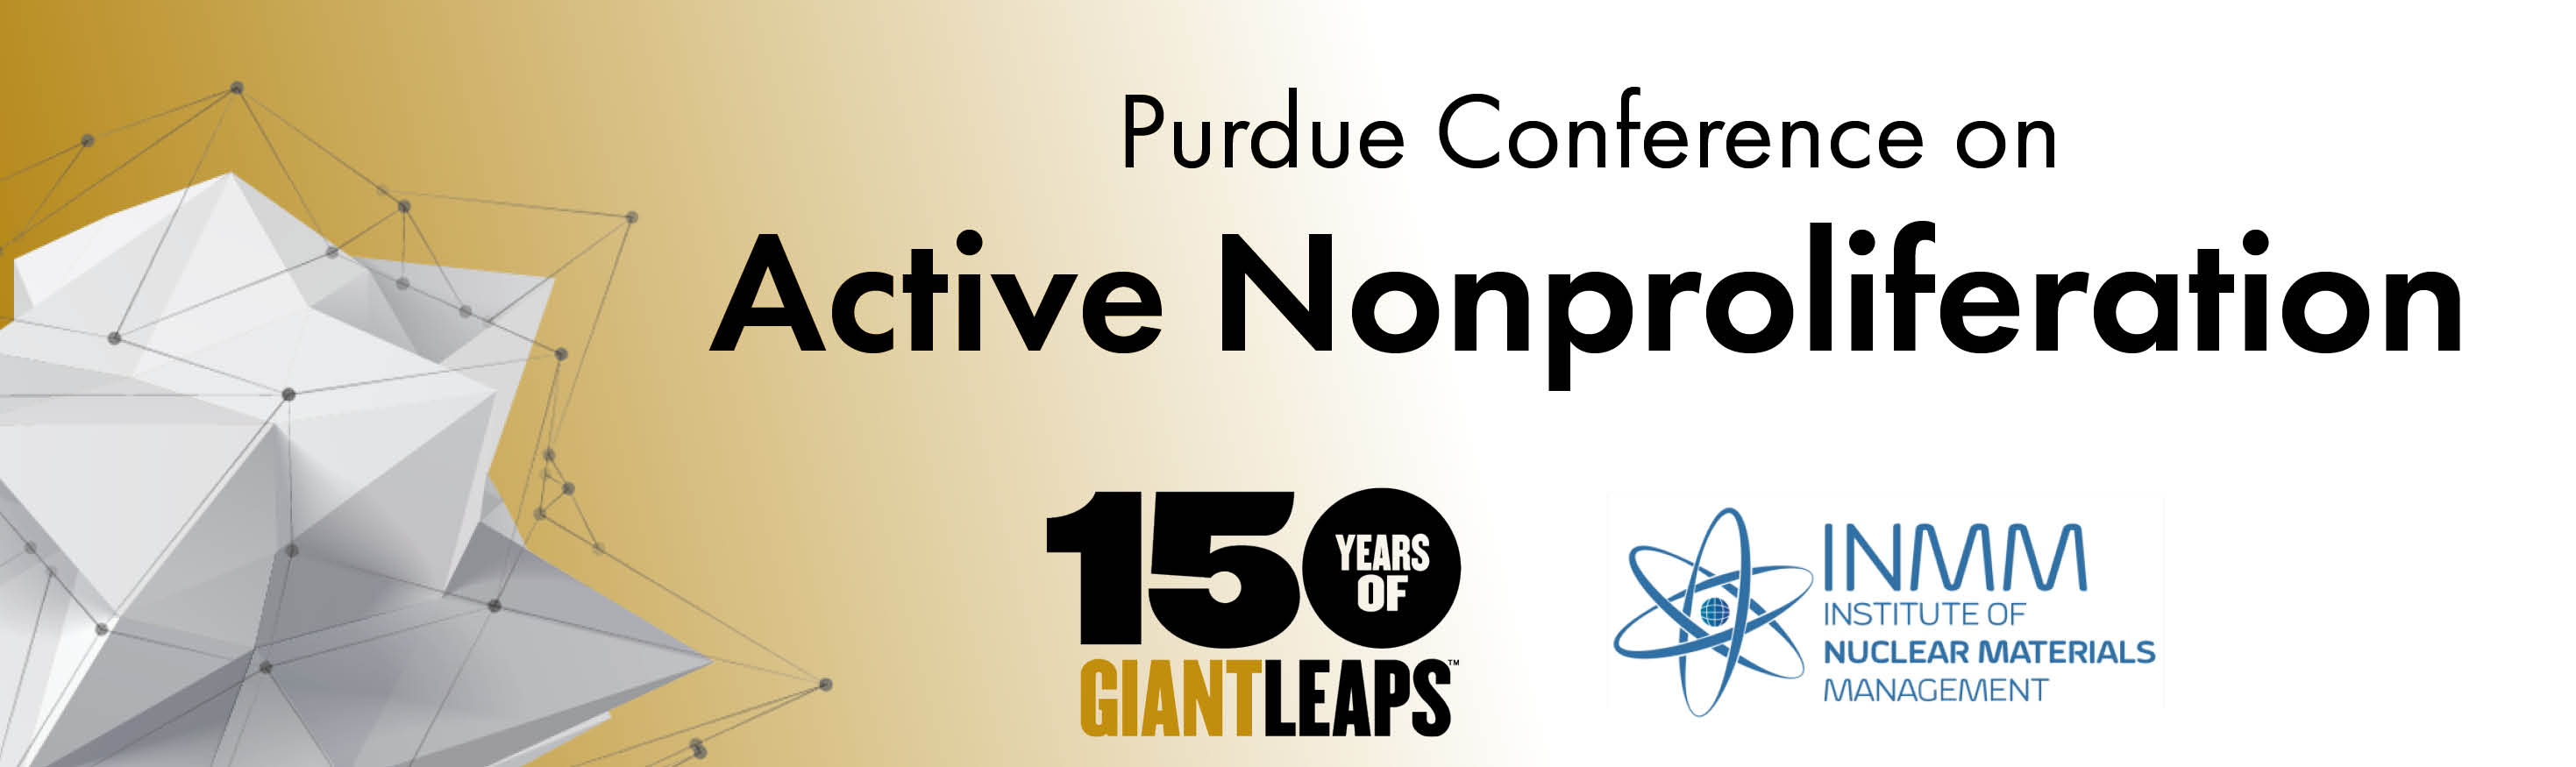 2019 Purdue Conference on Active Nonproliferation